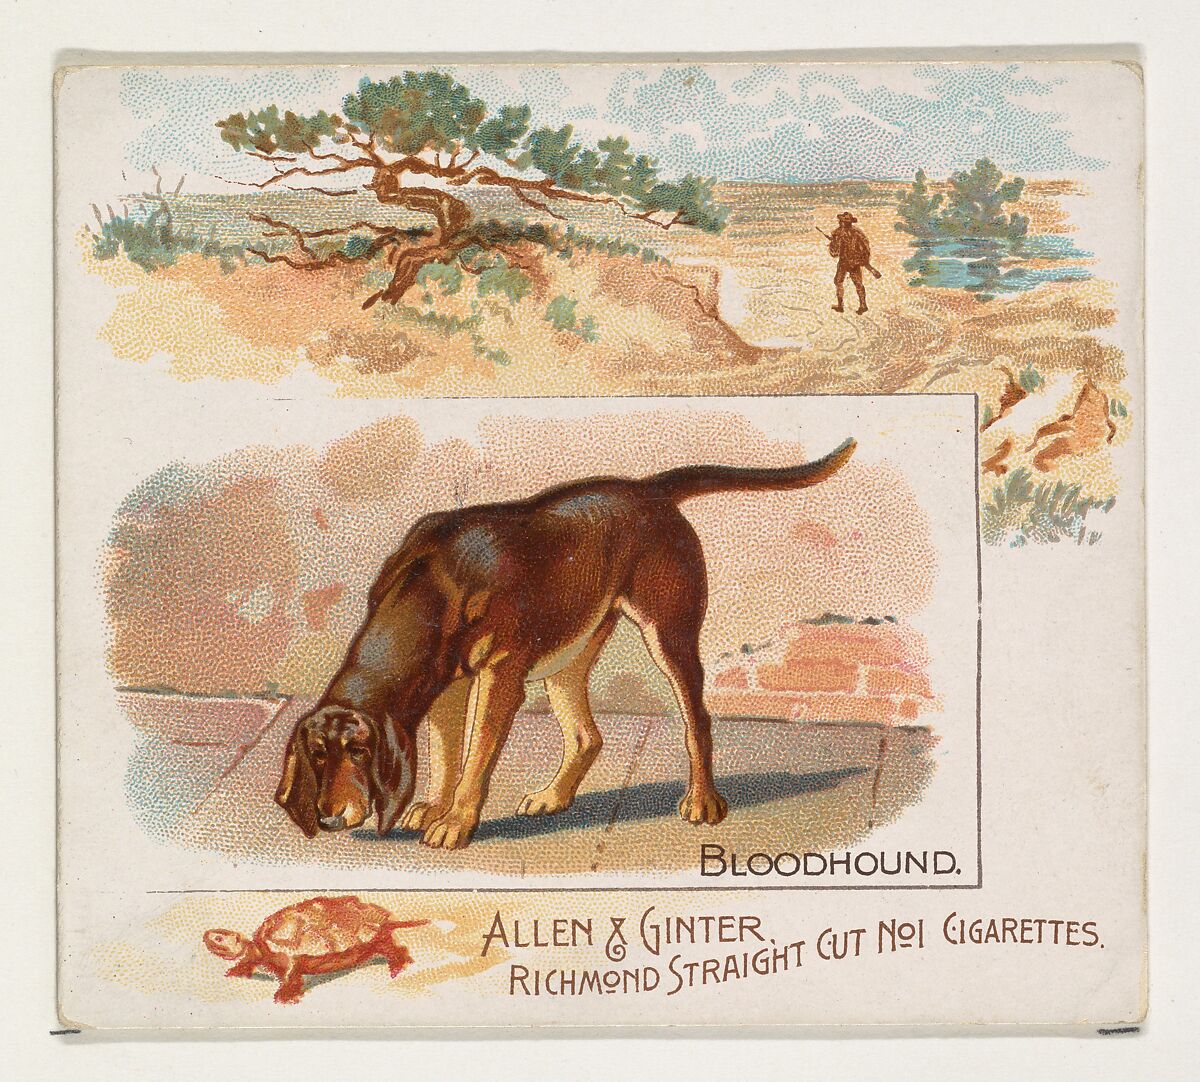 Bloodhound, from Quadrupeds series (N41) for Allen & Ginter Cigarettes, Issued by Allen &amp; Ginter (American, Richmond, Virginia), Commercial color lithograph 